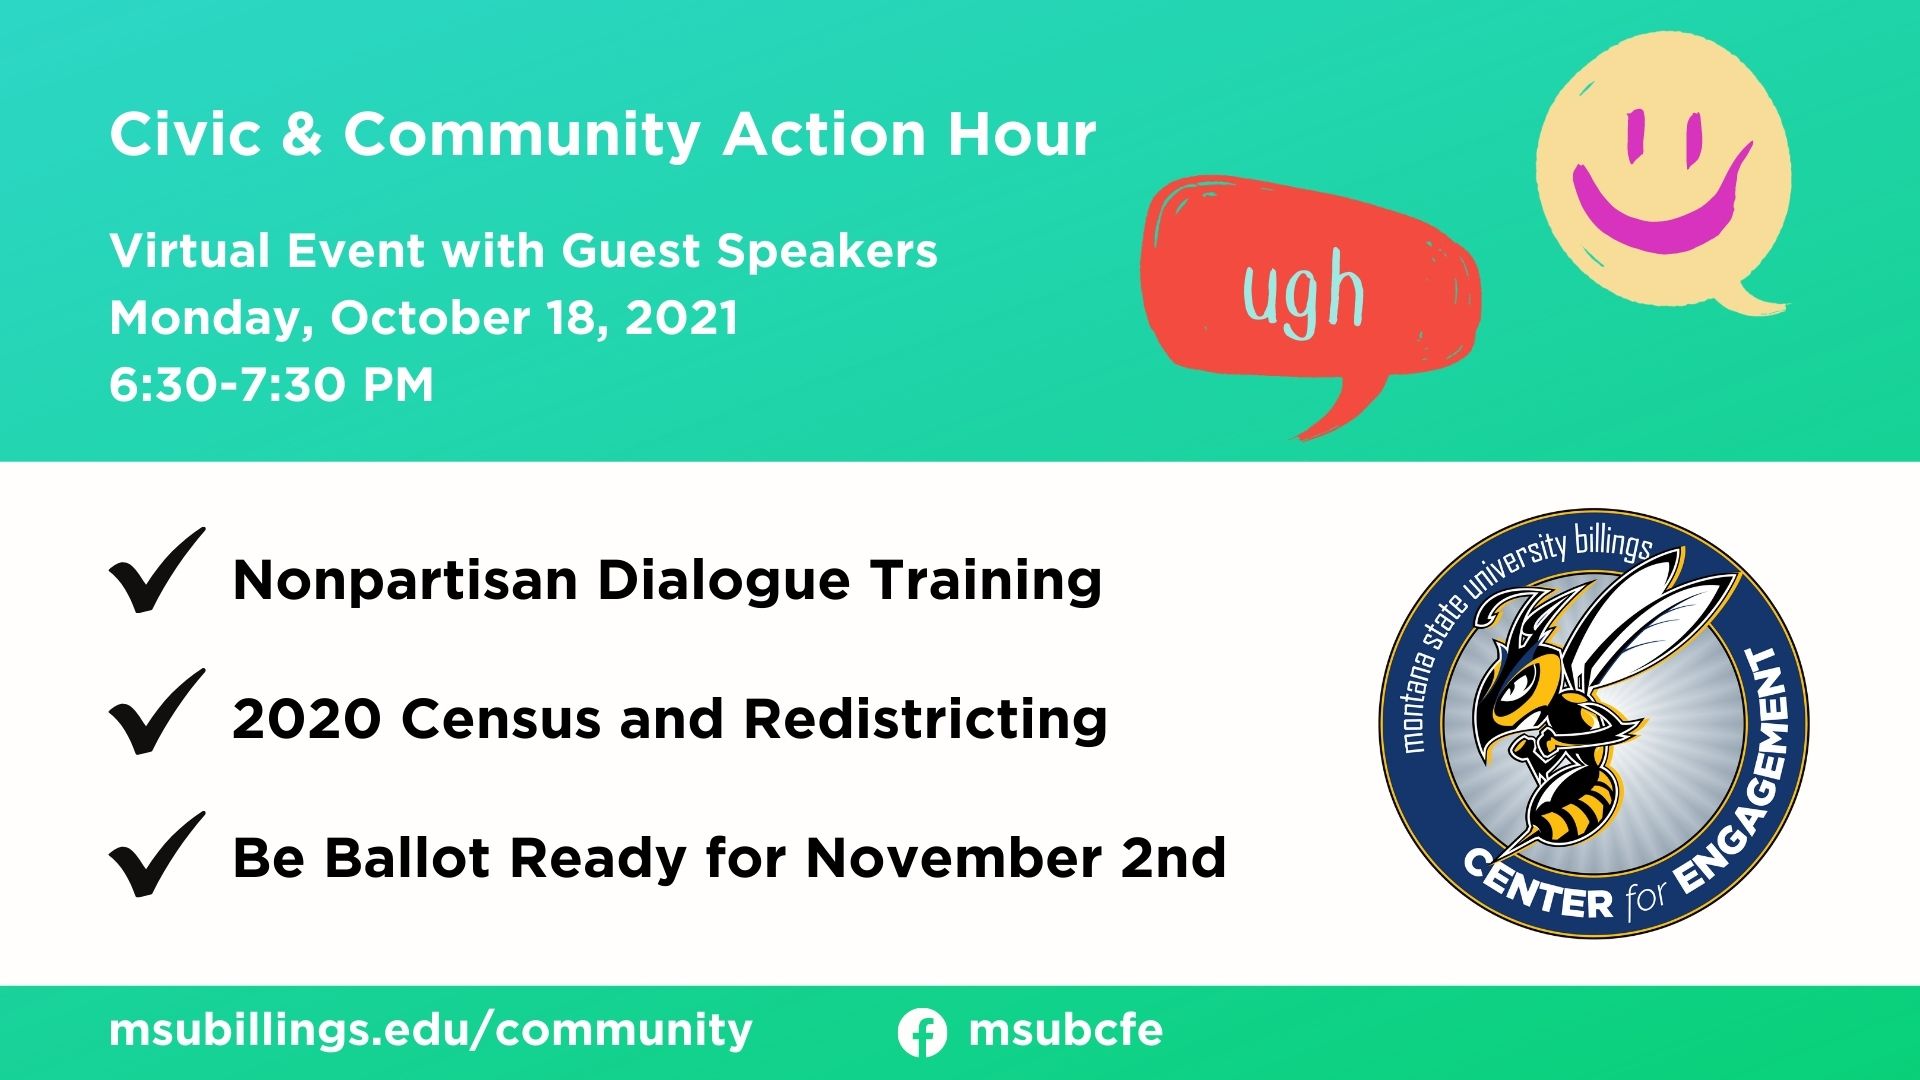 Civic and Community Action Hour. Virtual Event with Guest Speakers. Monday, October 18, 2021 6:30-7:30 PM. Nonpartisan Dialogue Training. 2020 Census and Redistricting. Be ballot ready for November 2nd.